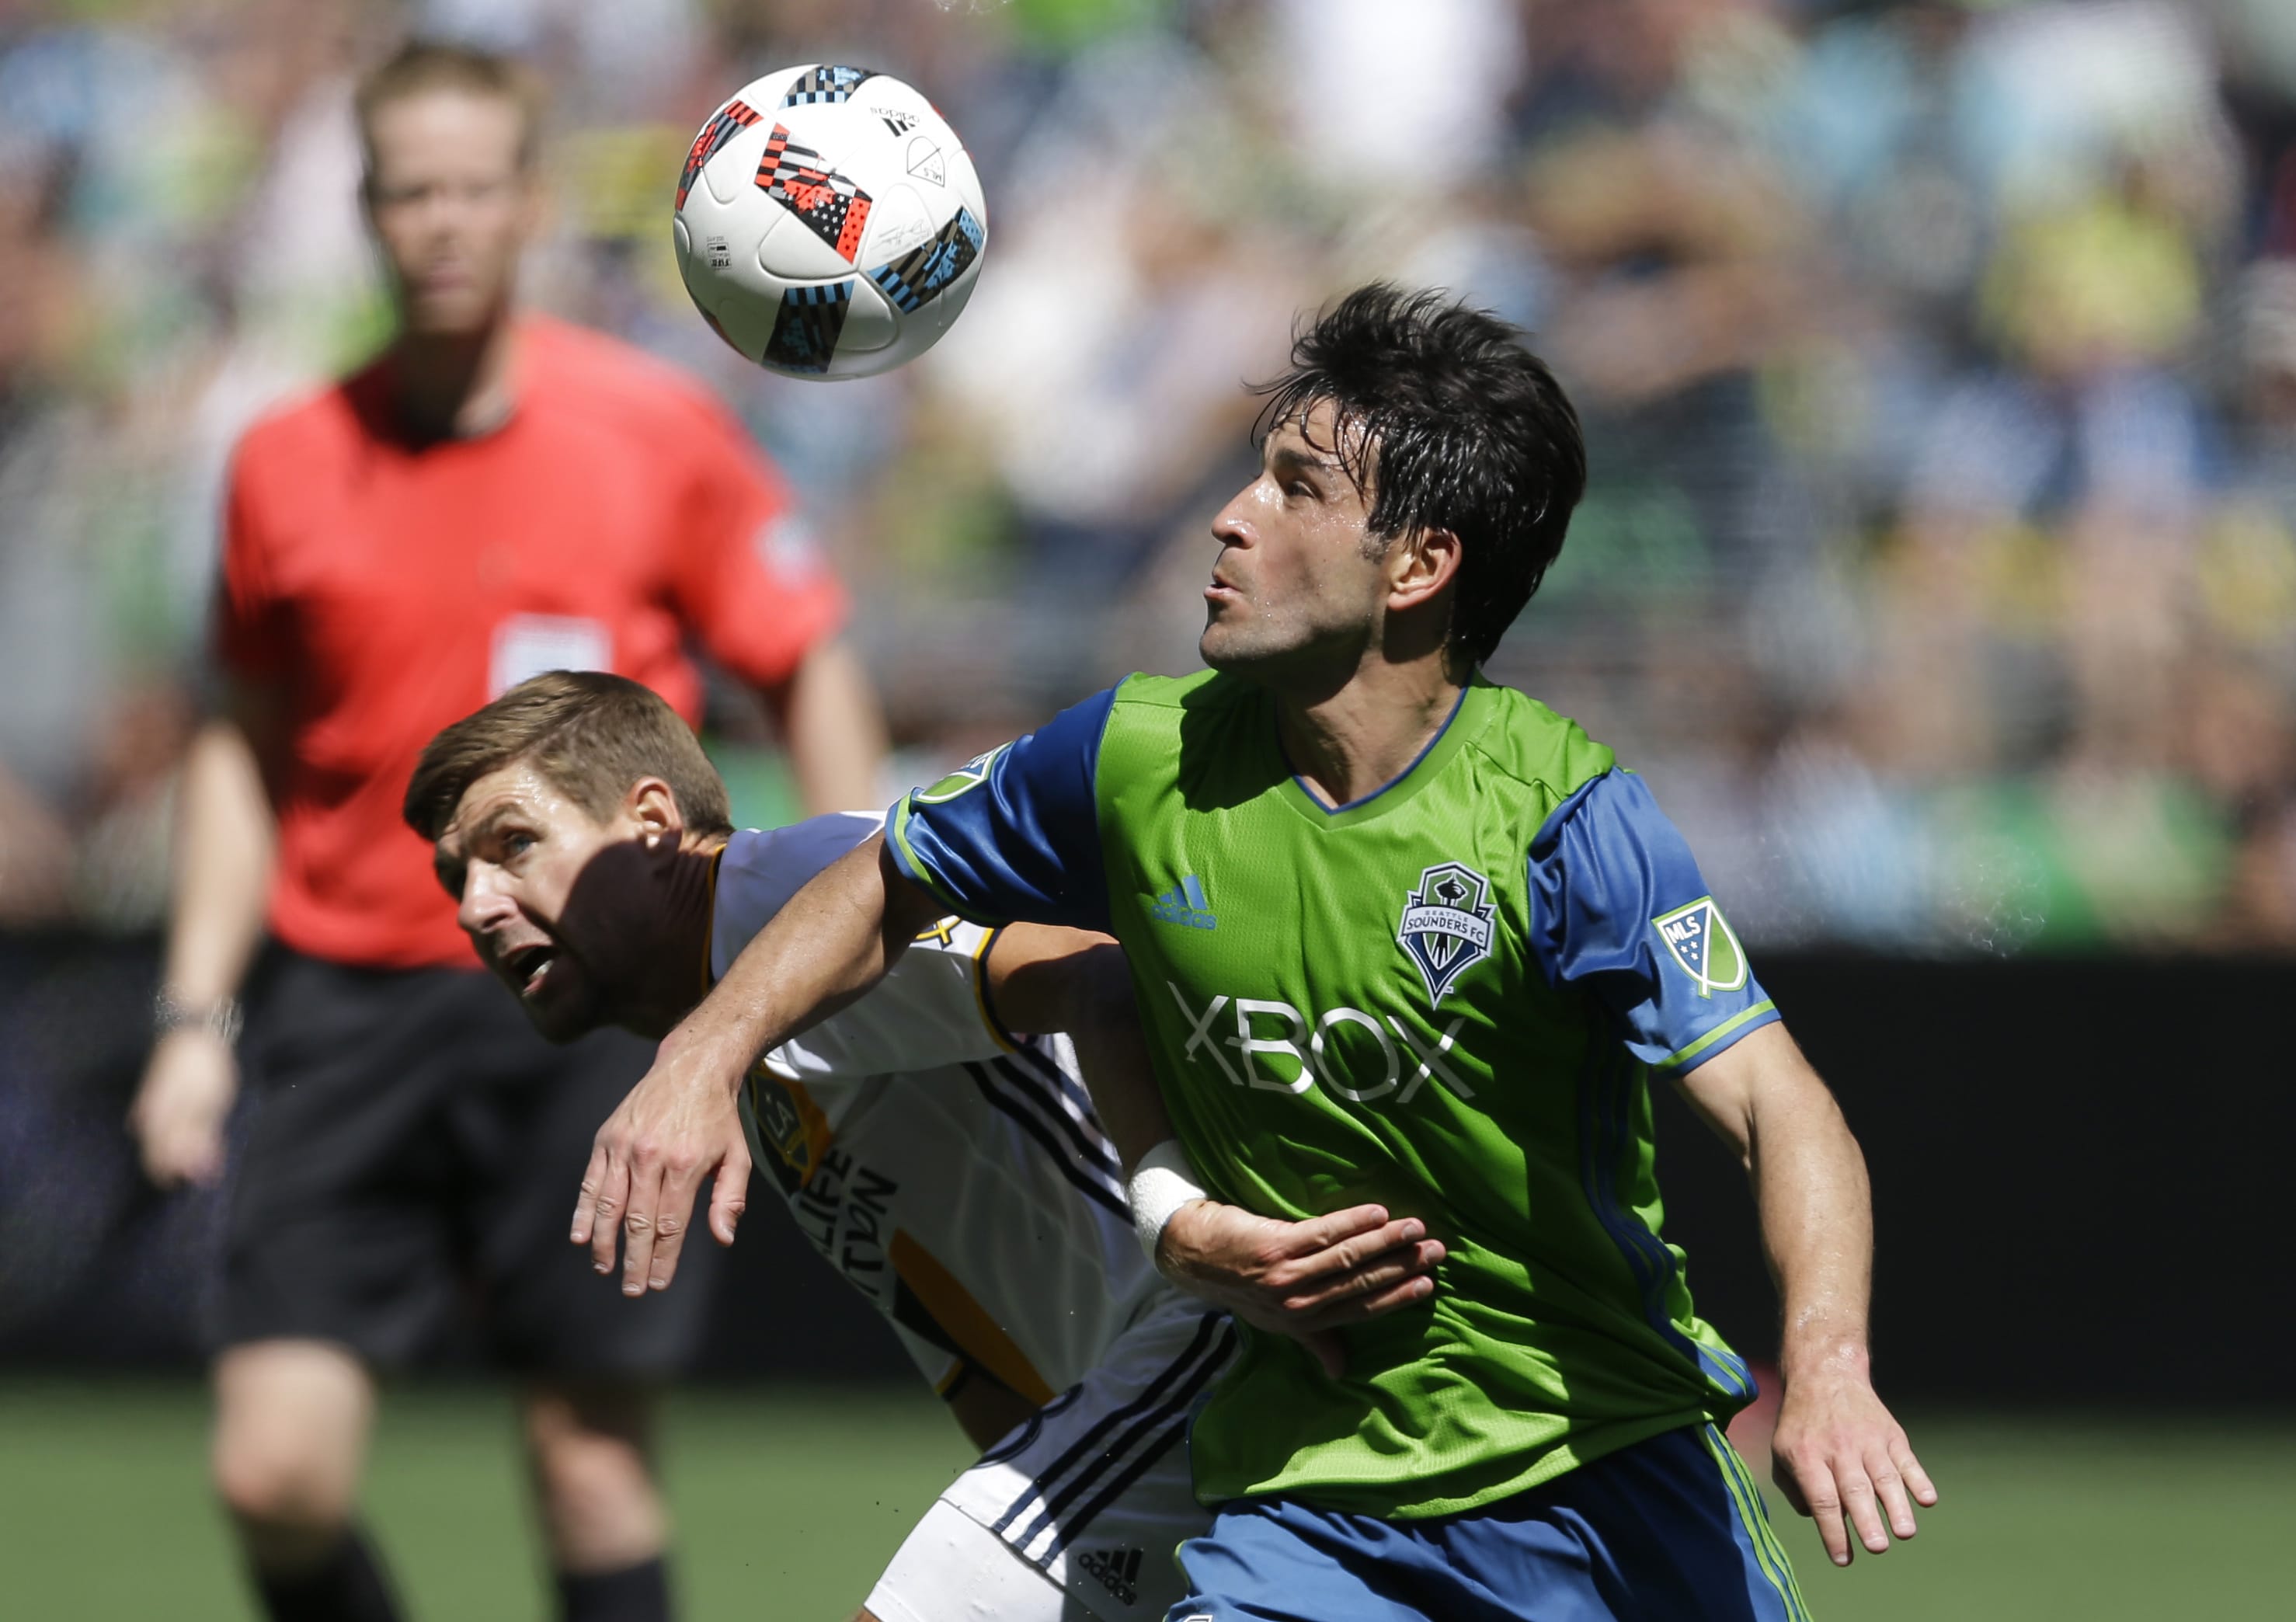 Seattle Sounders midfielder Nicolas Lodeiro, right, battles for the ball with Los Angeles Galaxy forward Steven Gerrard, left, in the second half of an MLS soccer match, Sunday, July 31, 2016, in Seattle. (AP Photo/Ted S.